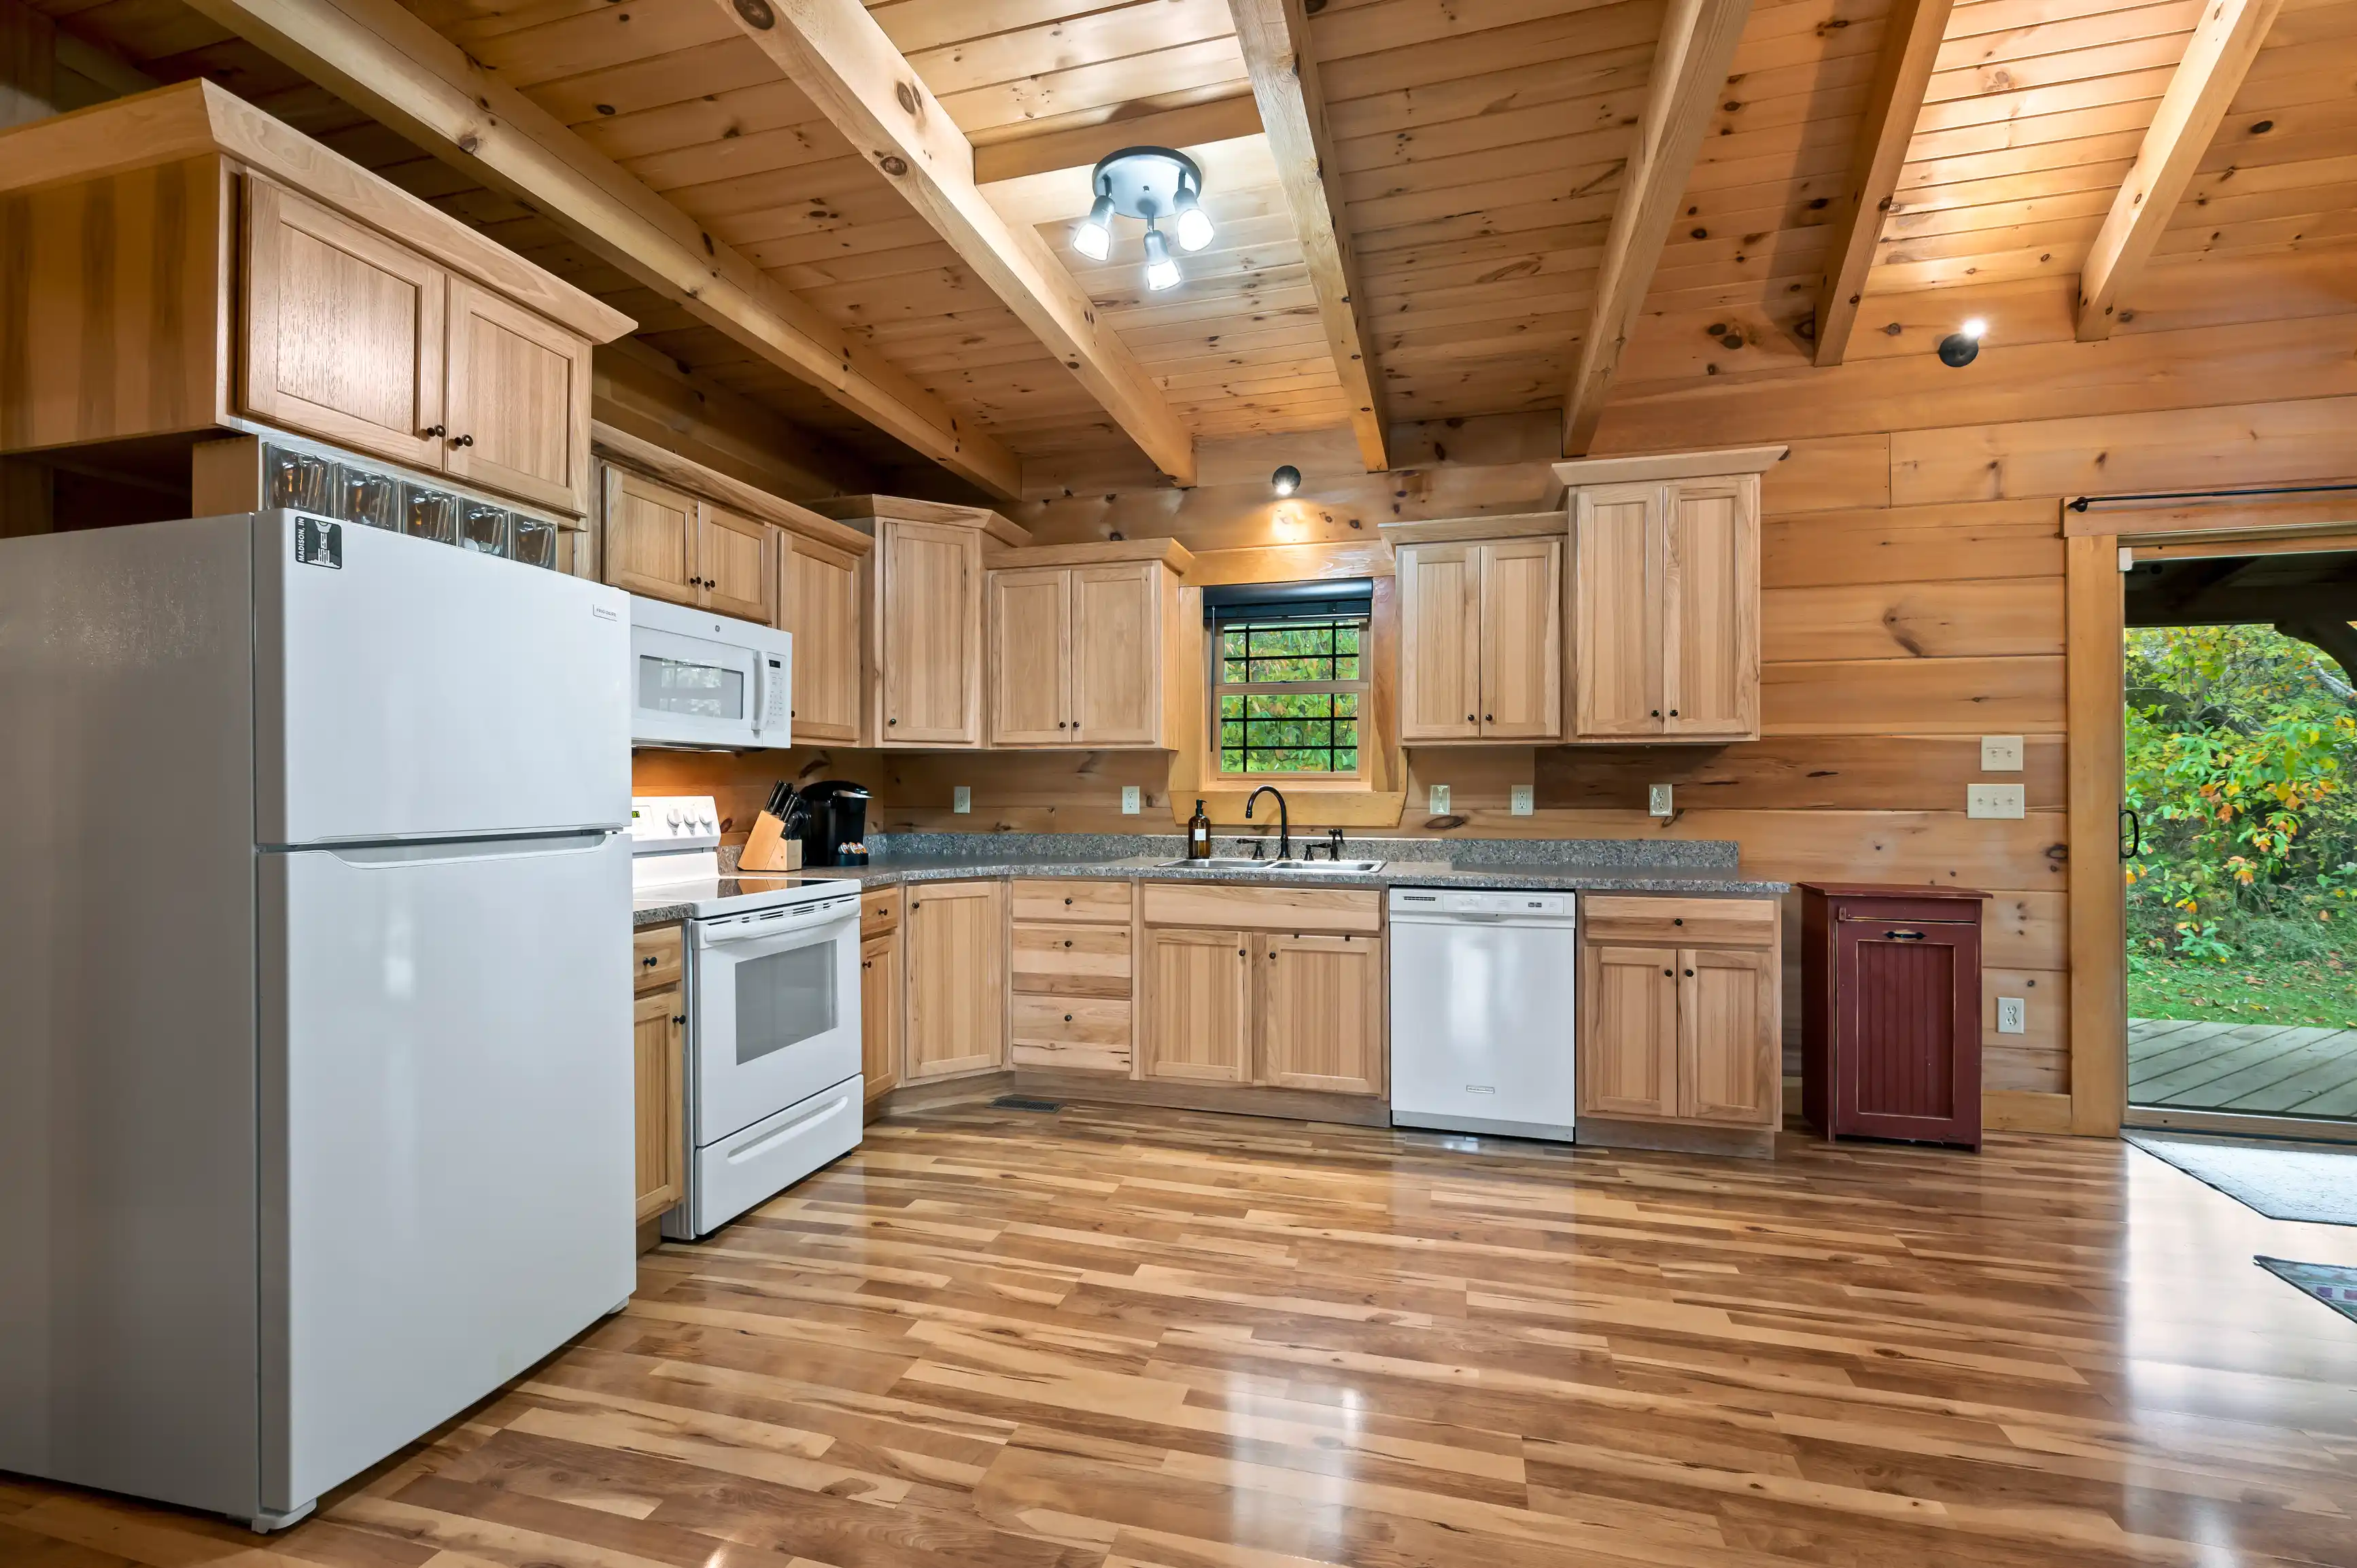 Interior of a modern kitchen with wooden cabinets, stainless steel appliances, and hardwood floors.